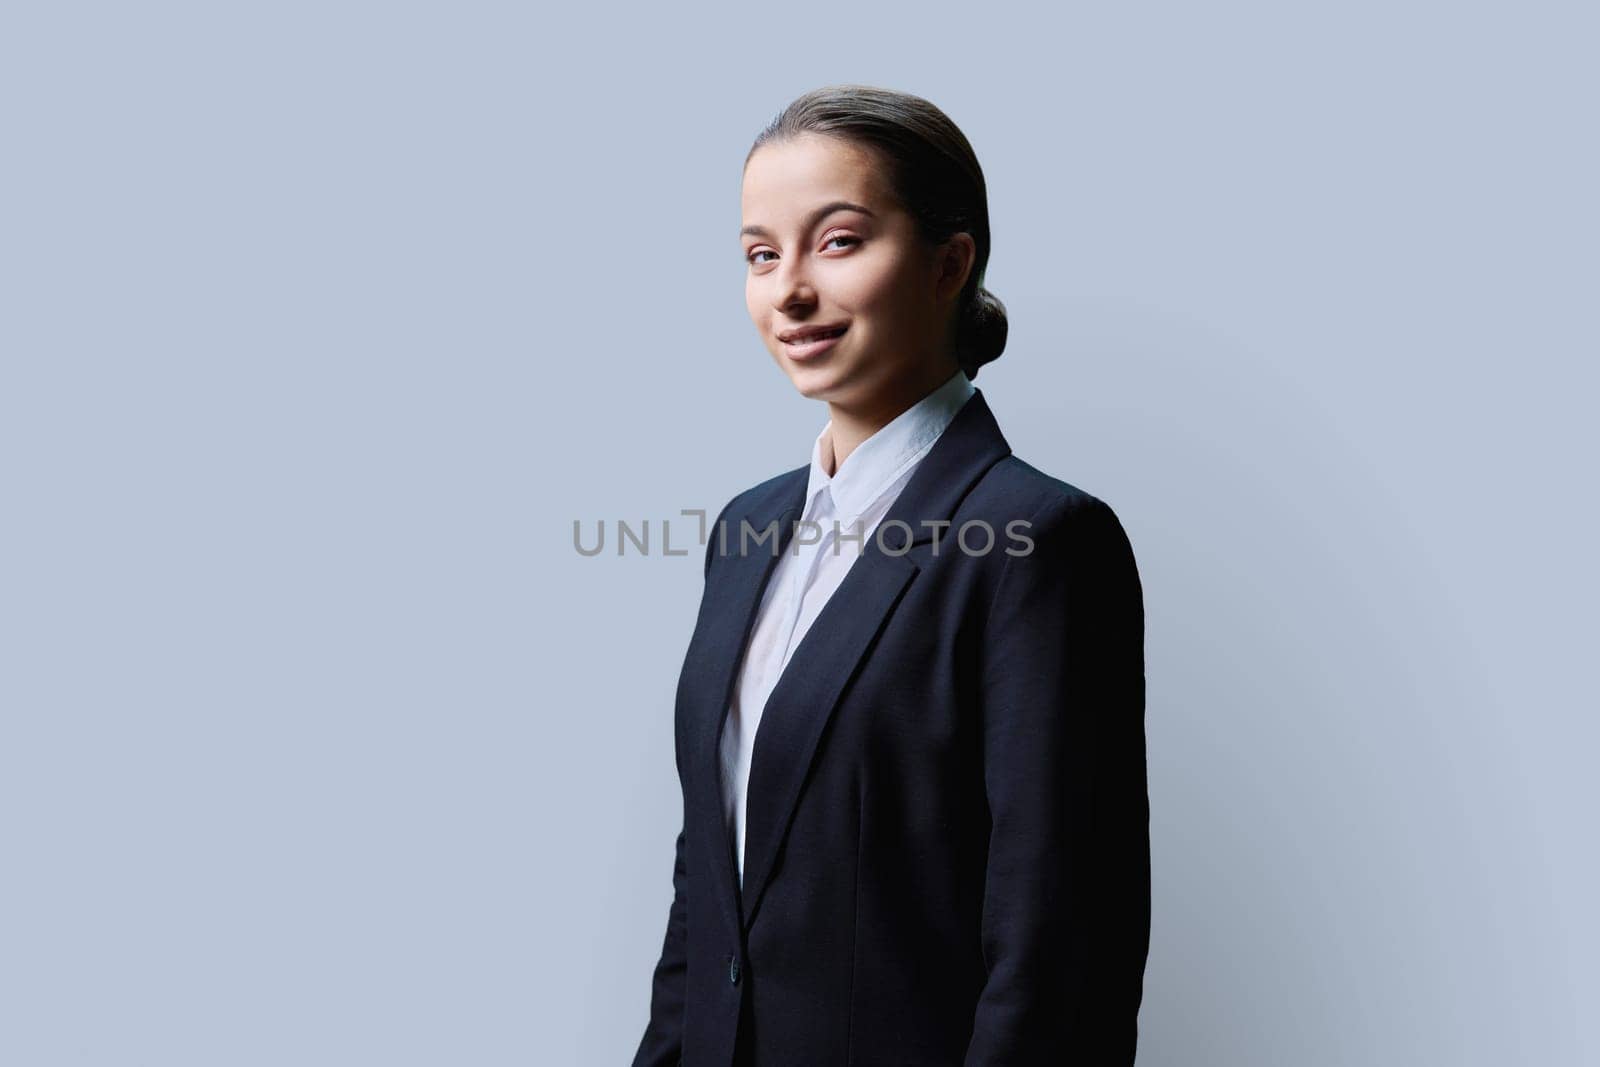 Portrait of confident teenage high school student girl on grey background. Smiling female in formal business attire looking at camera. Education, high school, adolescence concept